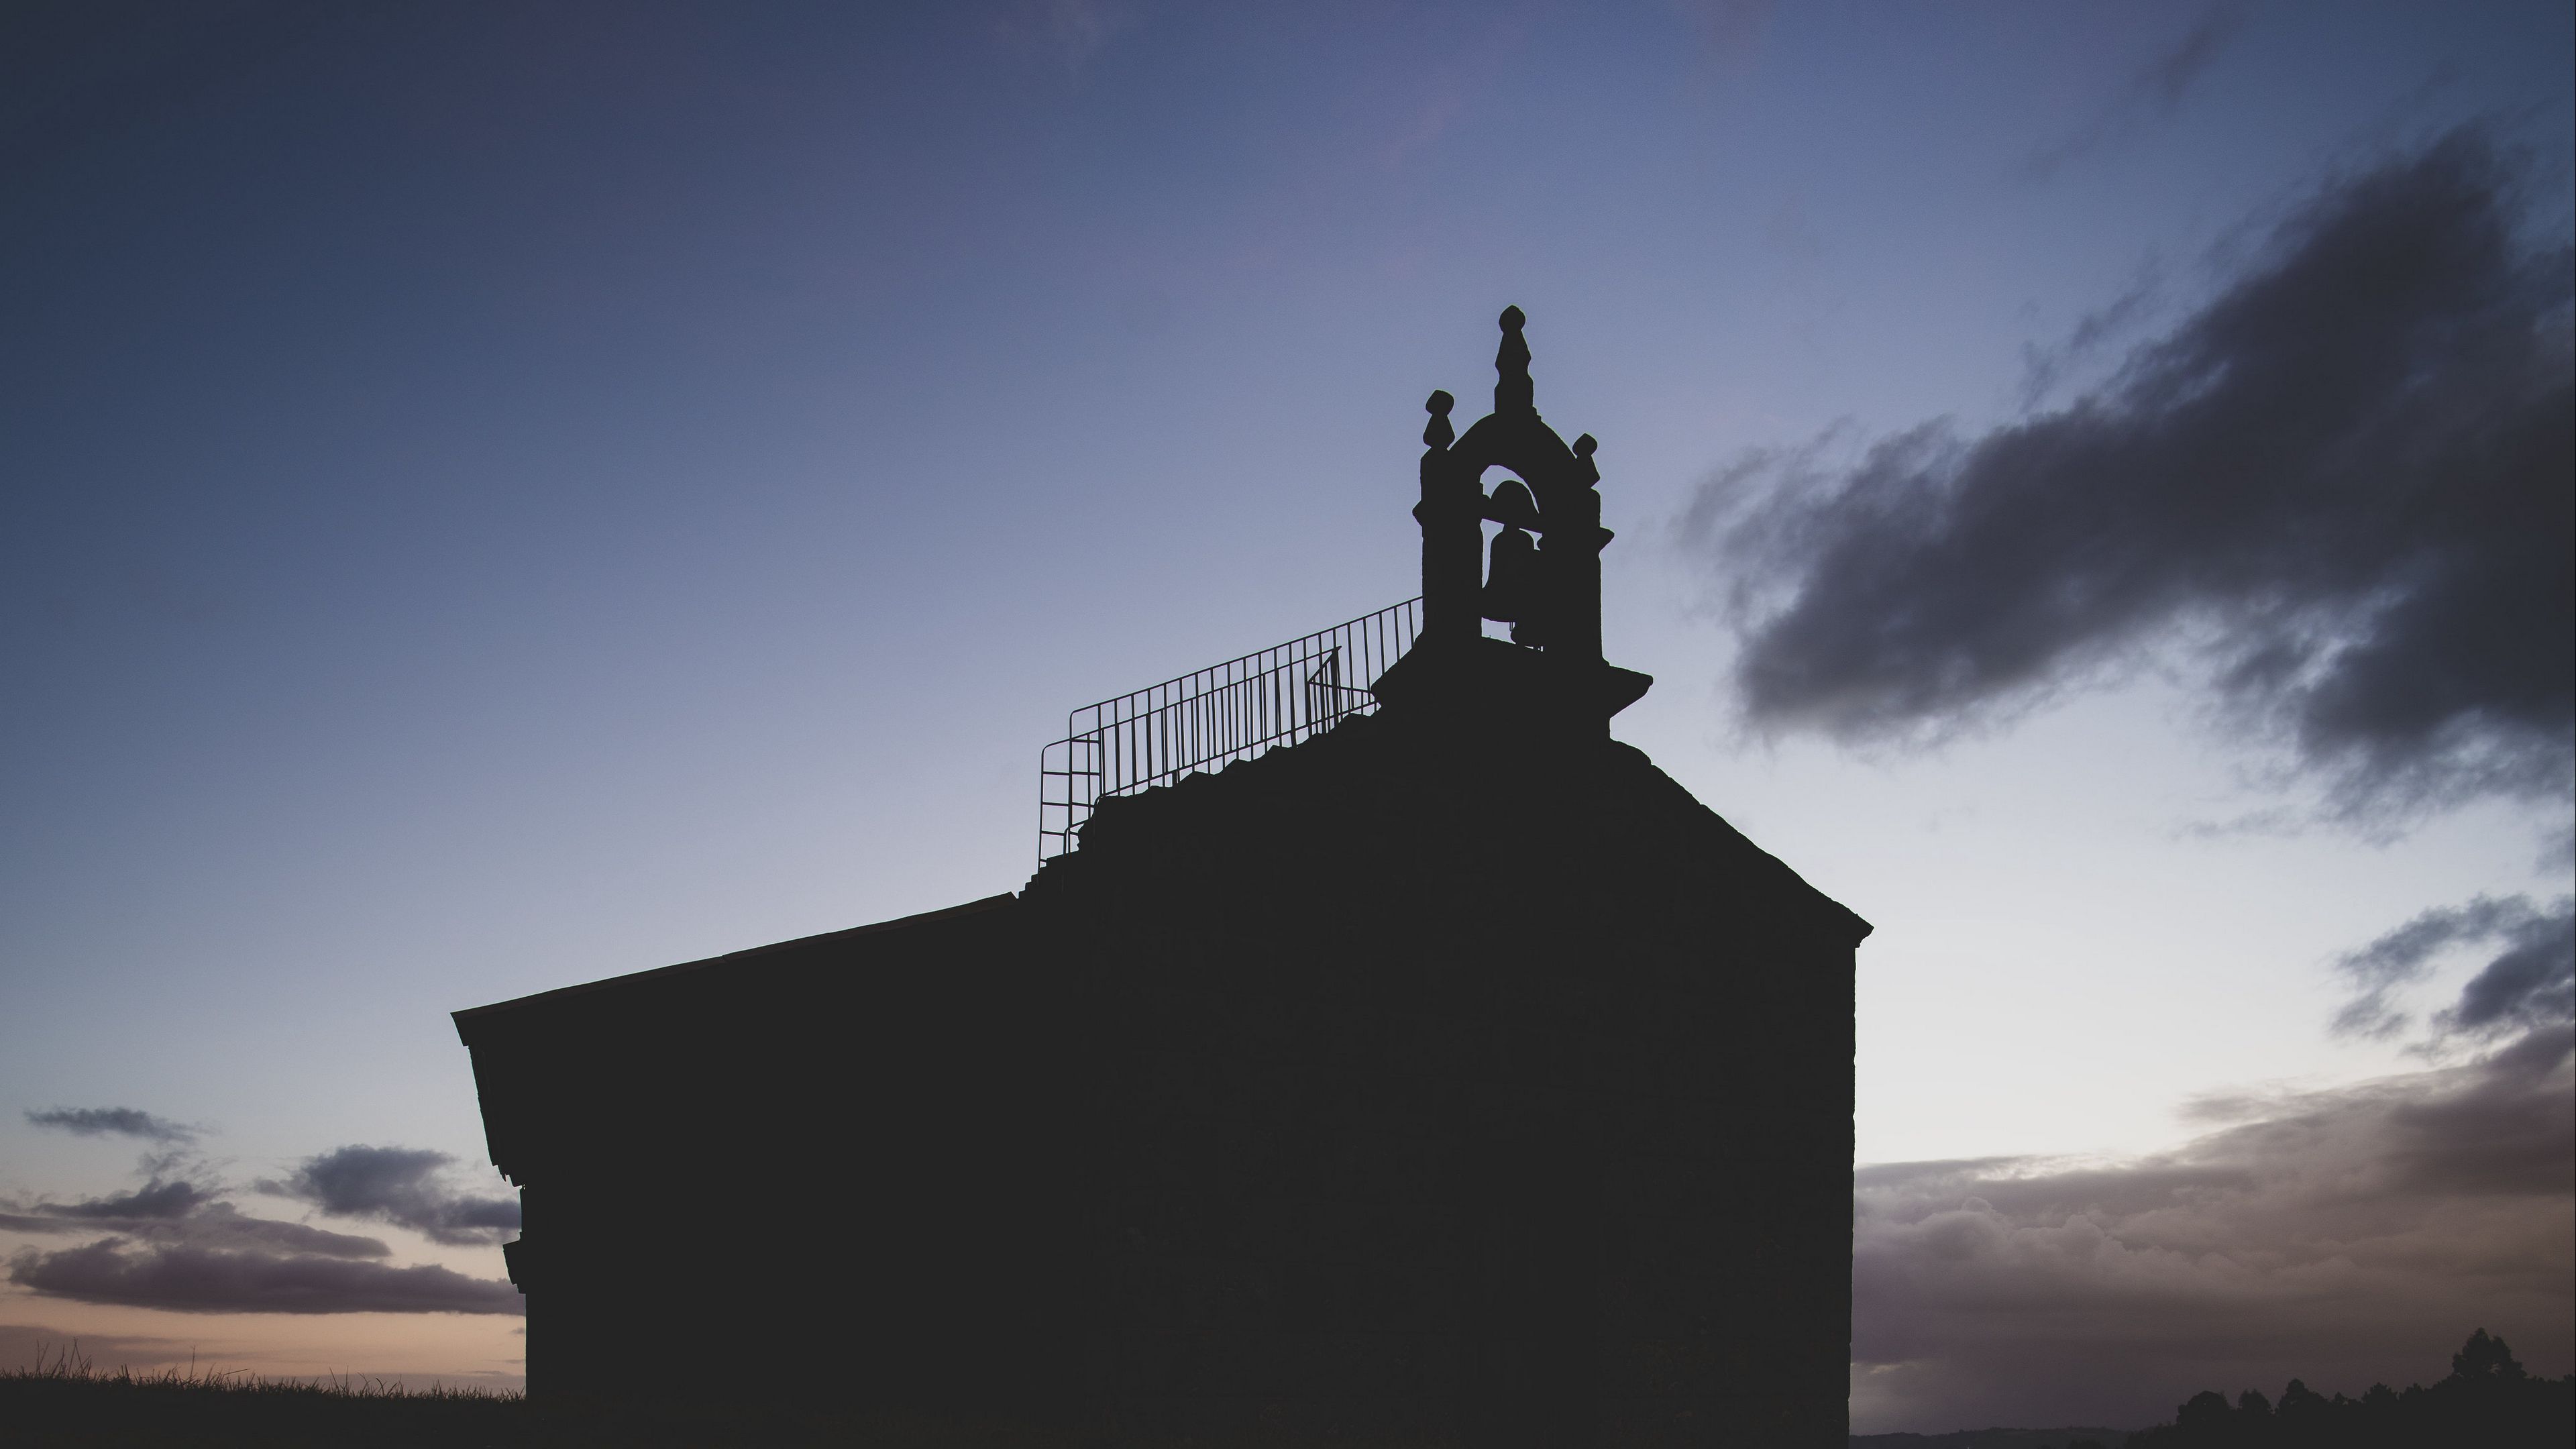 Download wallpaper 3840x2160 bell tower, buildings, silhouette, evening ...